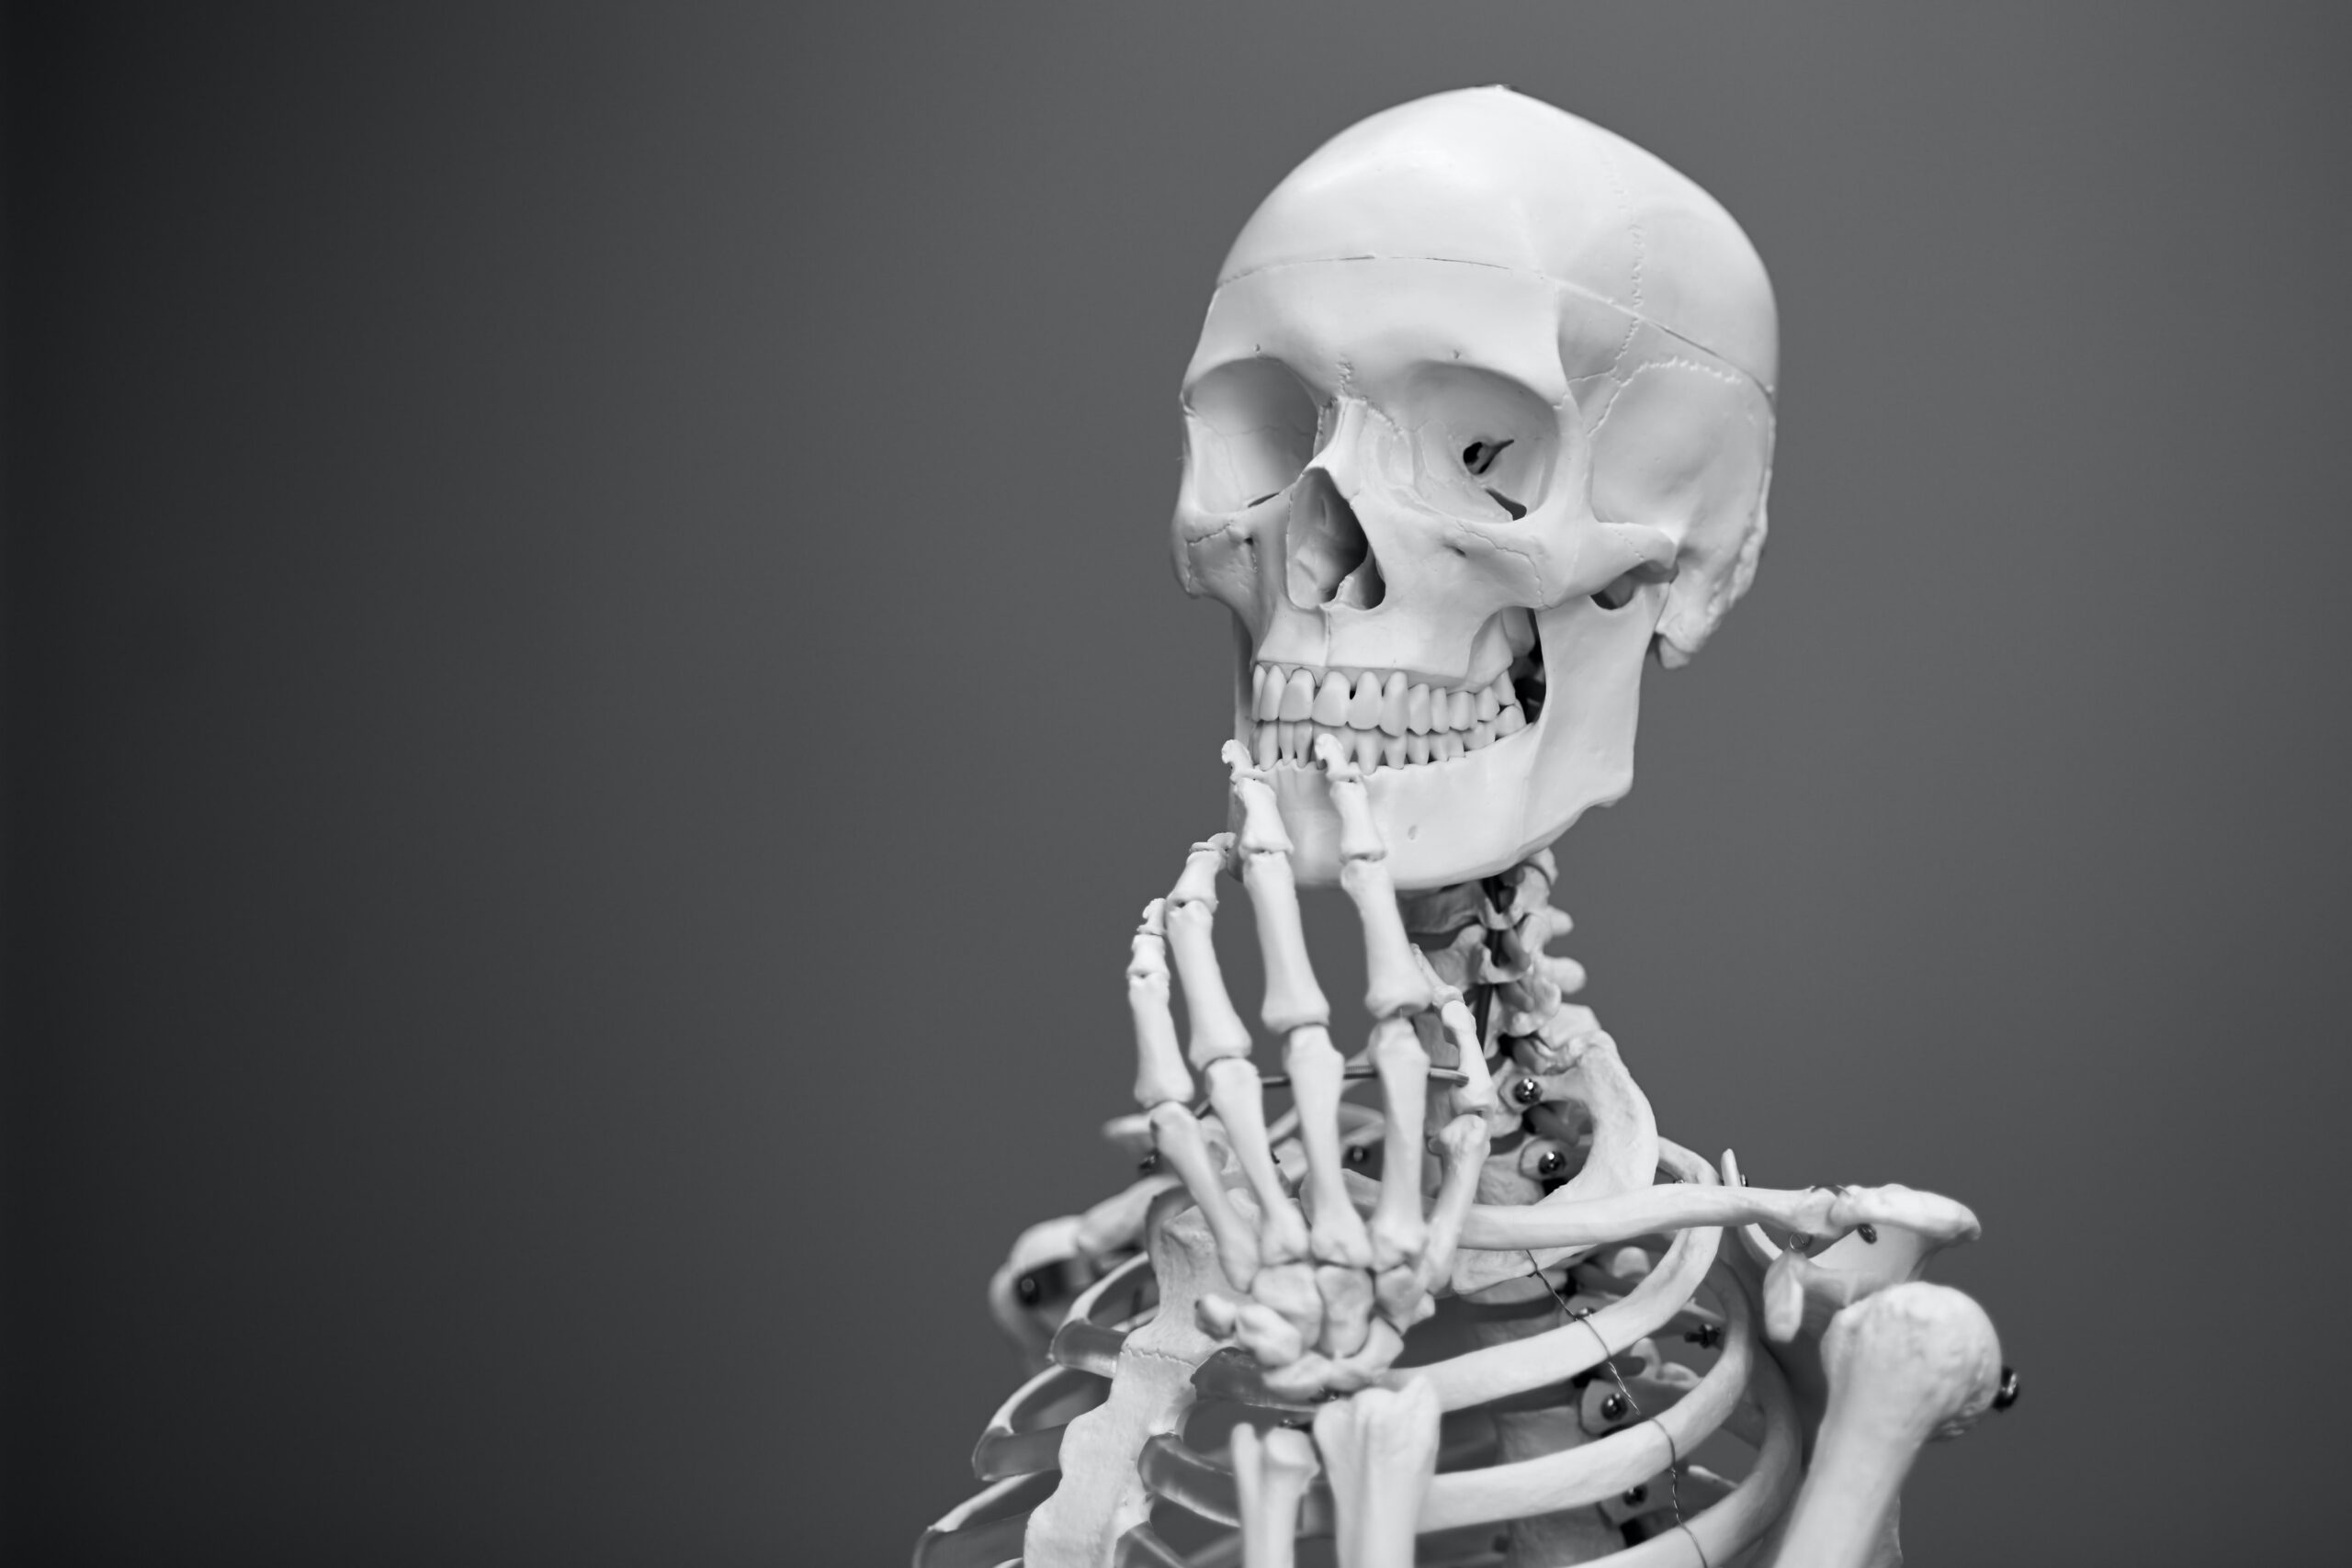 managing arthritis and joint pain. Skeleton with hand on chin